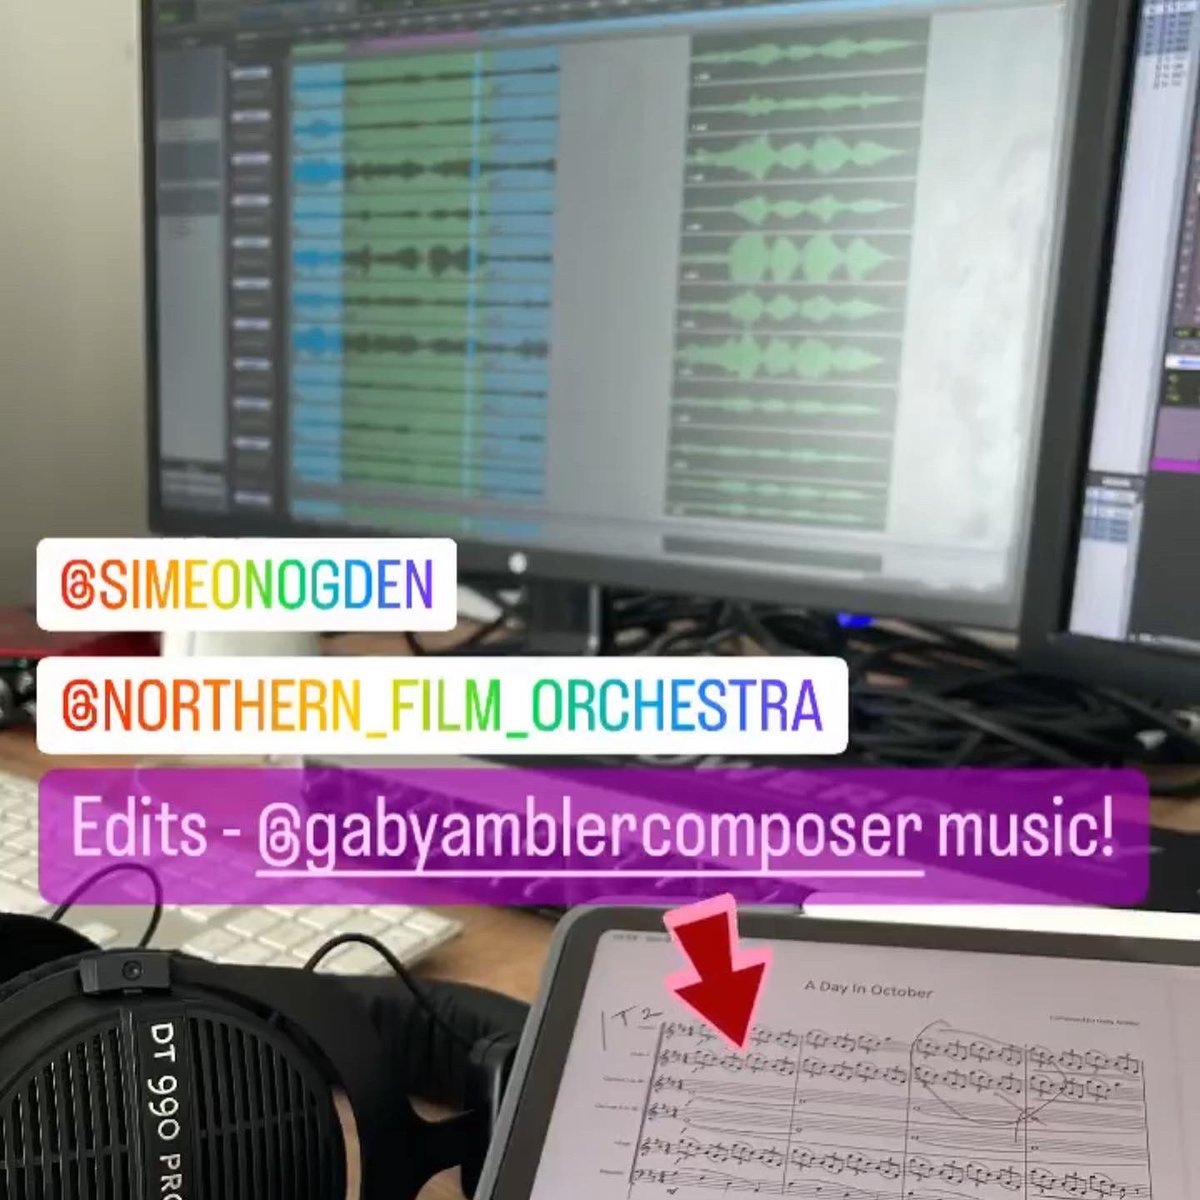 Enjoyable few days of preparing and recording a wide variety of music with @NFOrchestra ! Lovely pieces by #RushilRanjan #OrchestralQawwaliProject yesterday (amazing singing by @Abi_Sampa in our headphones) as well as last Friday’s shared session. Looking forward to the releases!